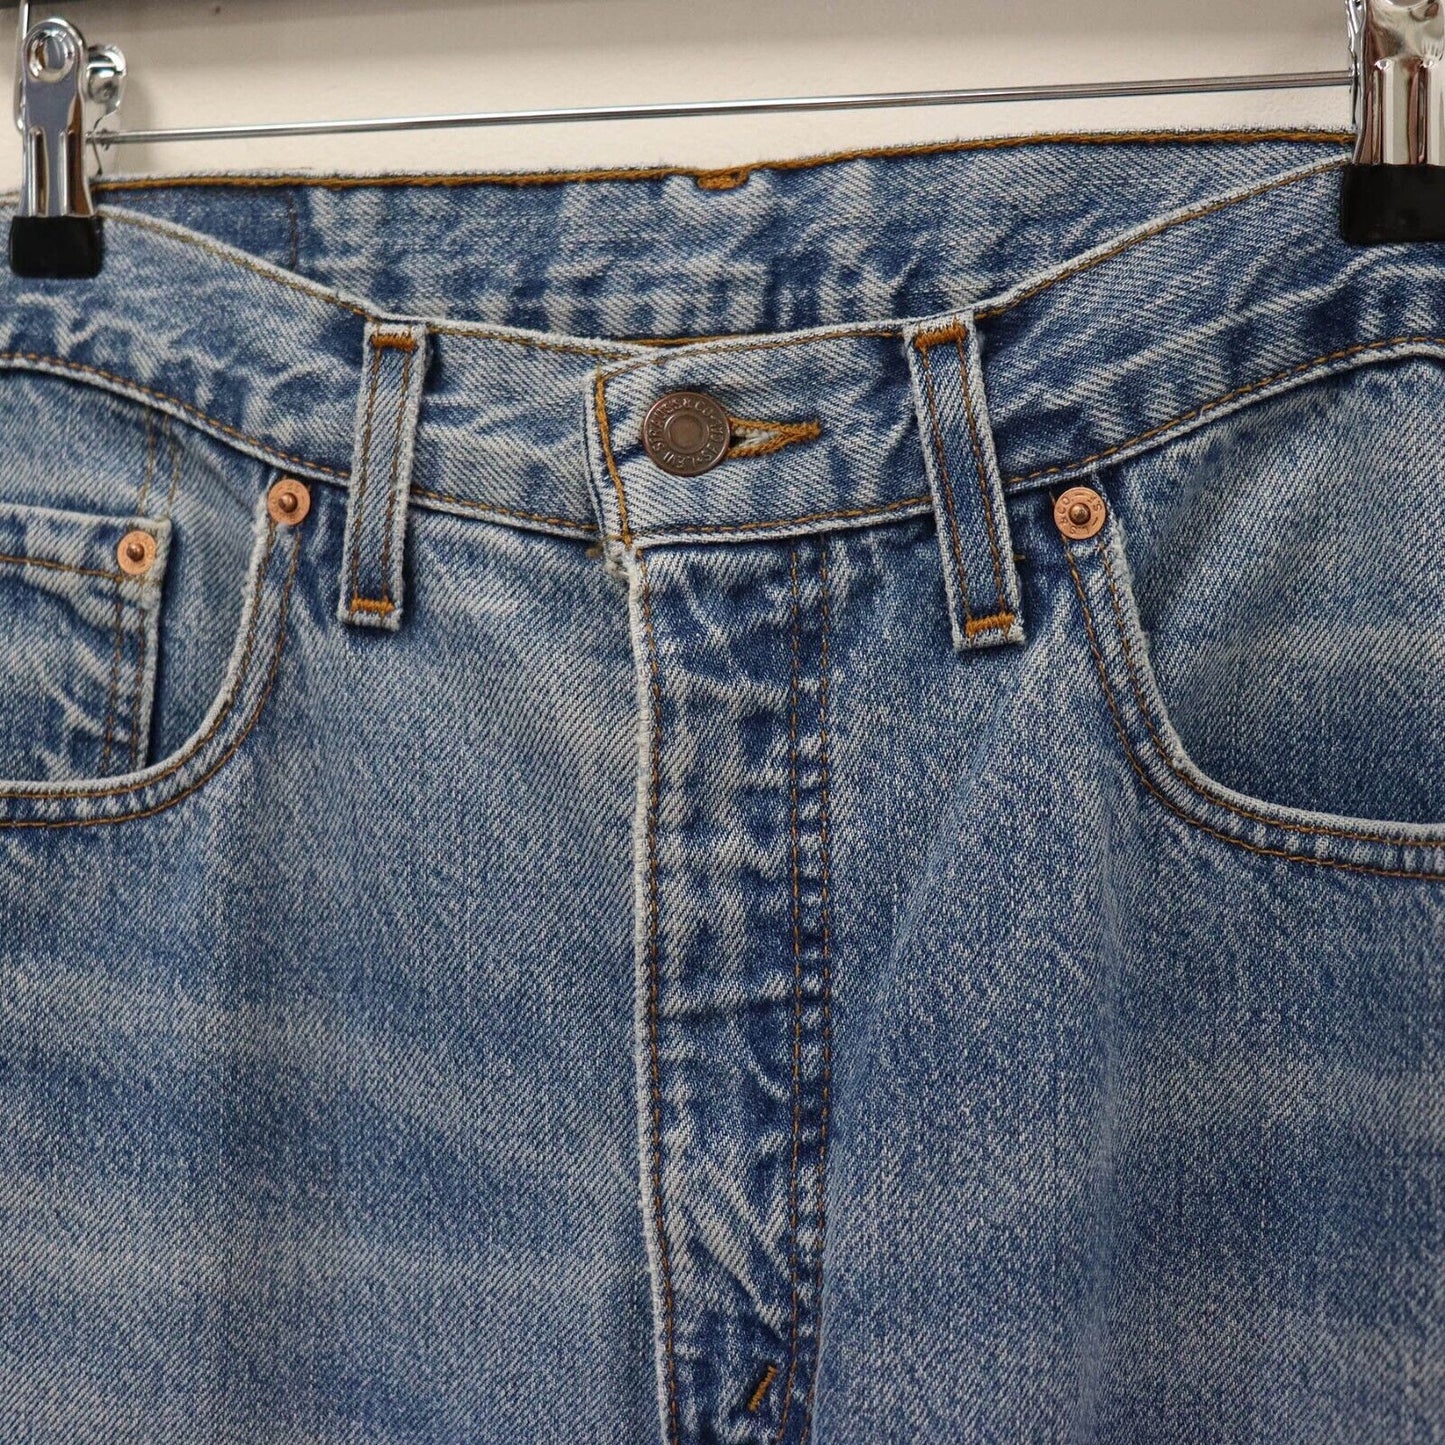 90s Levi’s High Waist Mom Fit Jeans Size UK16 L32